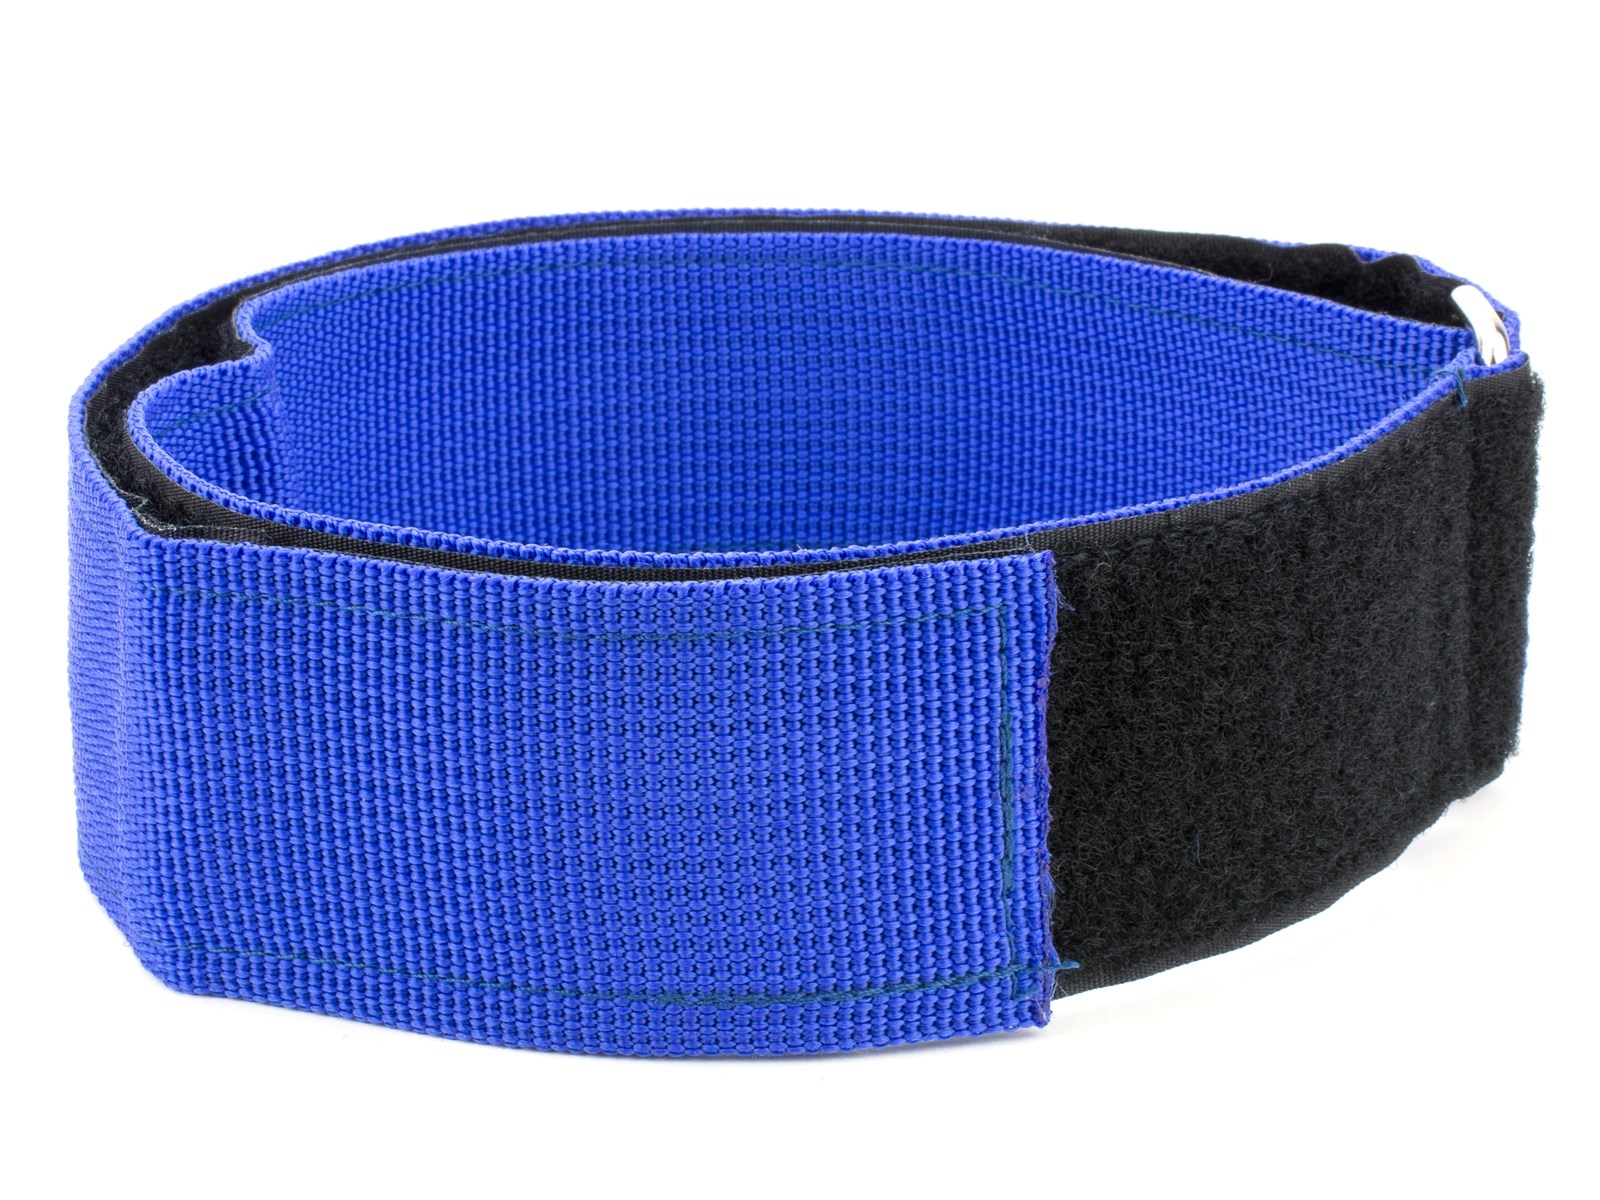 36 x 2 Inch Heavy-Duty Blue Cinch Strap - 5 Pack - Secure™ Cable Ties